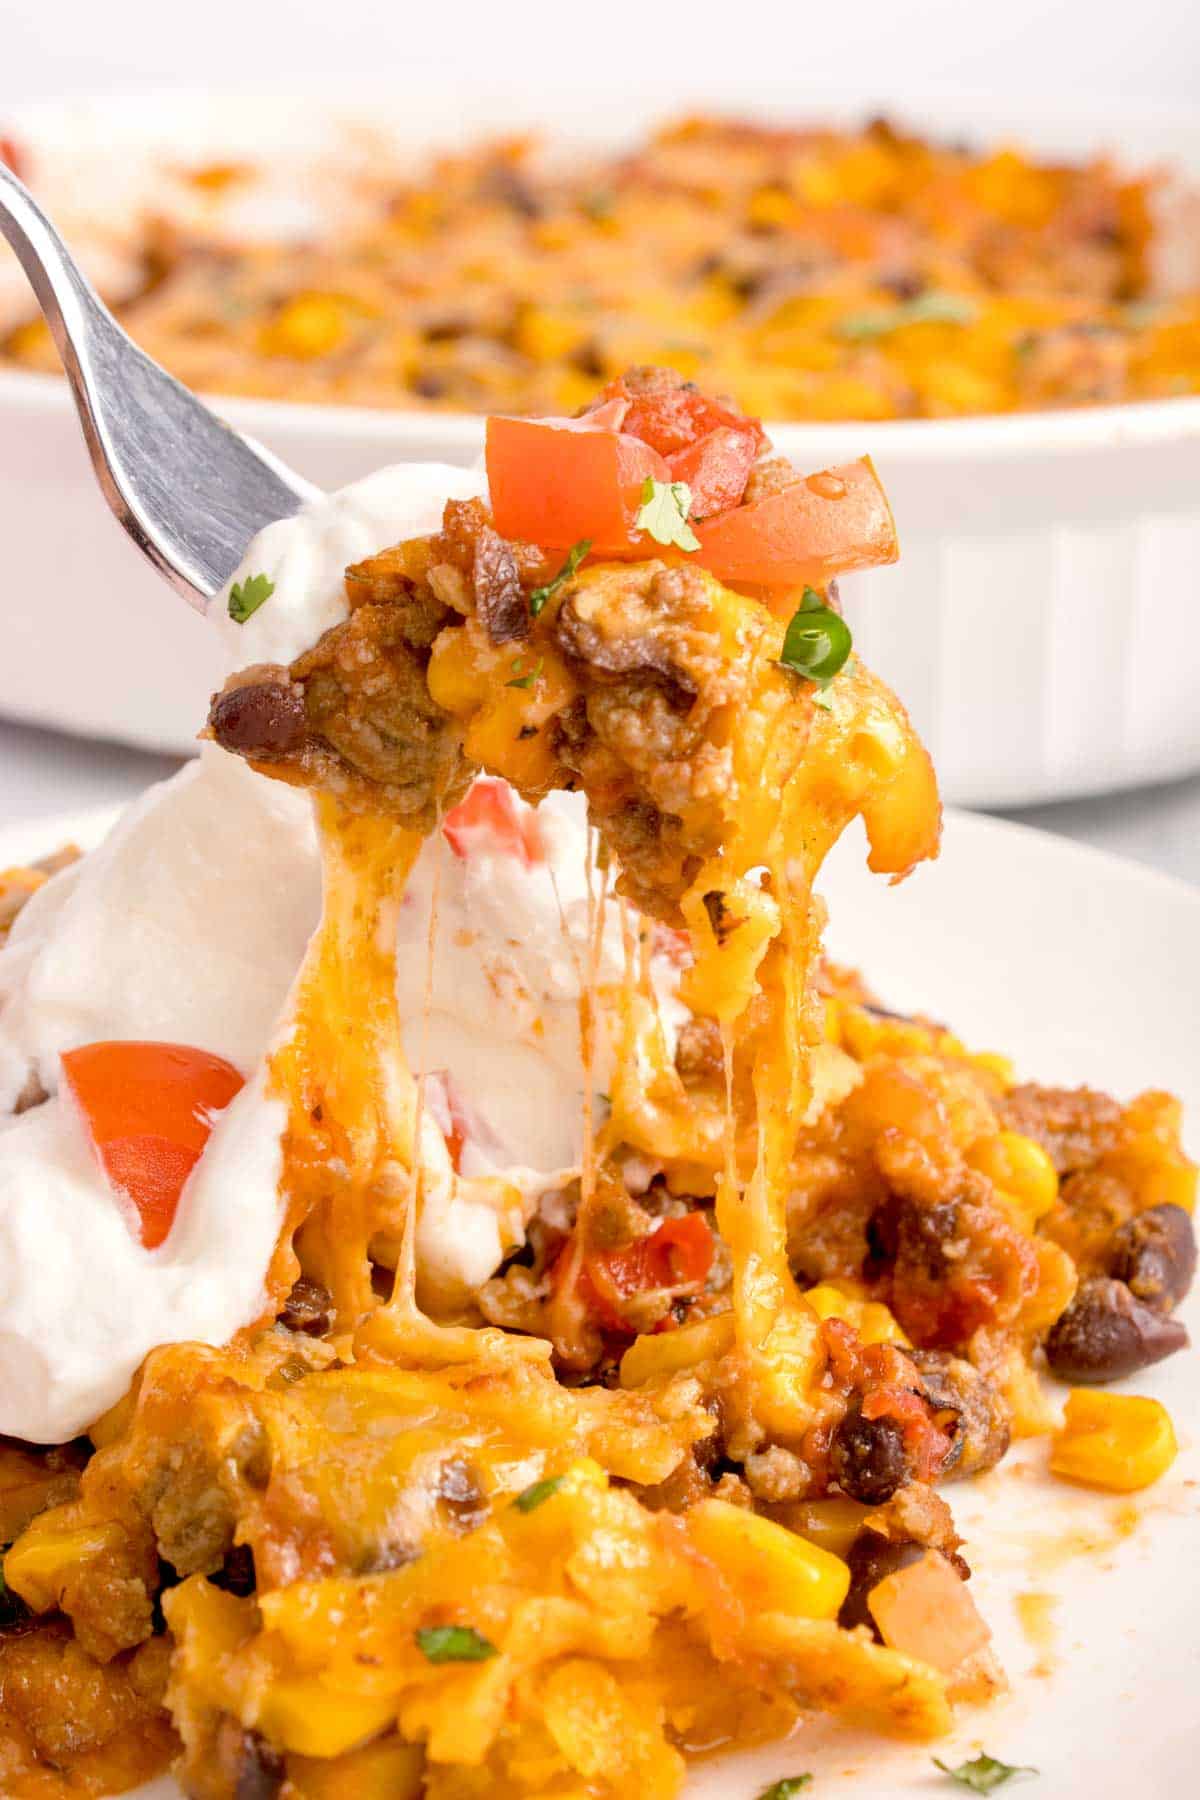 Mexican Ground Beef Casserole is a hearty dish loaded with ground beef, diced tomatoes, black beans, corn, cheddar cheese and corn tortillas.